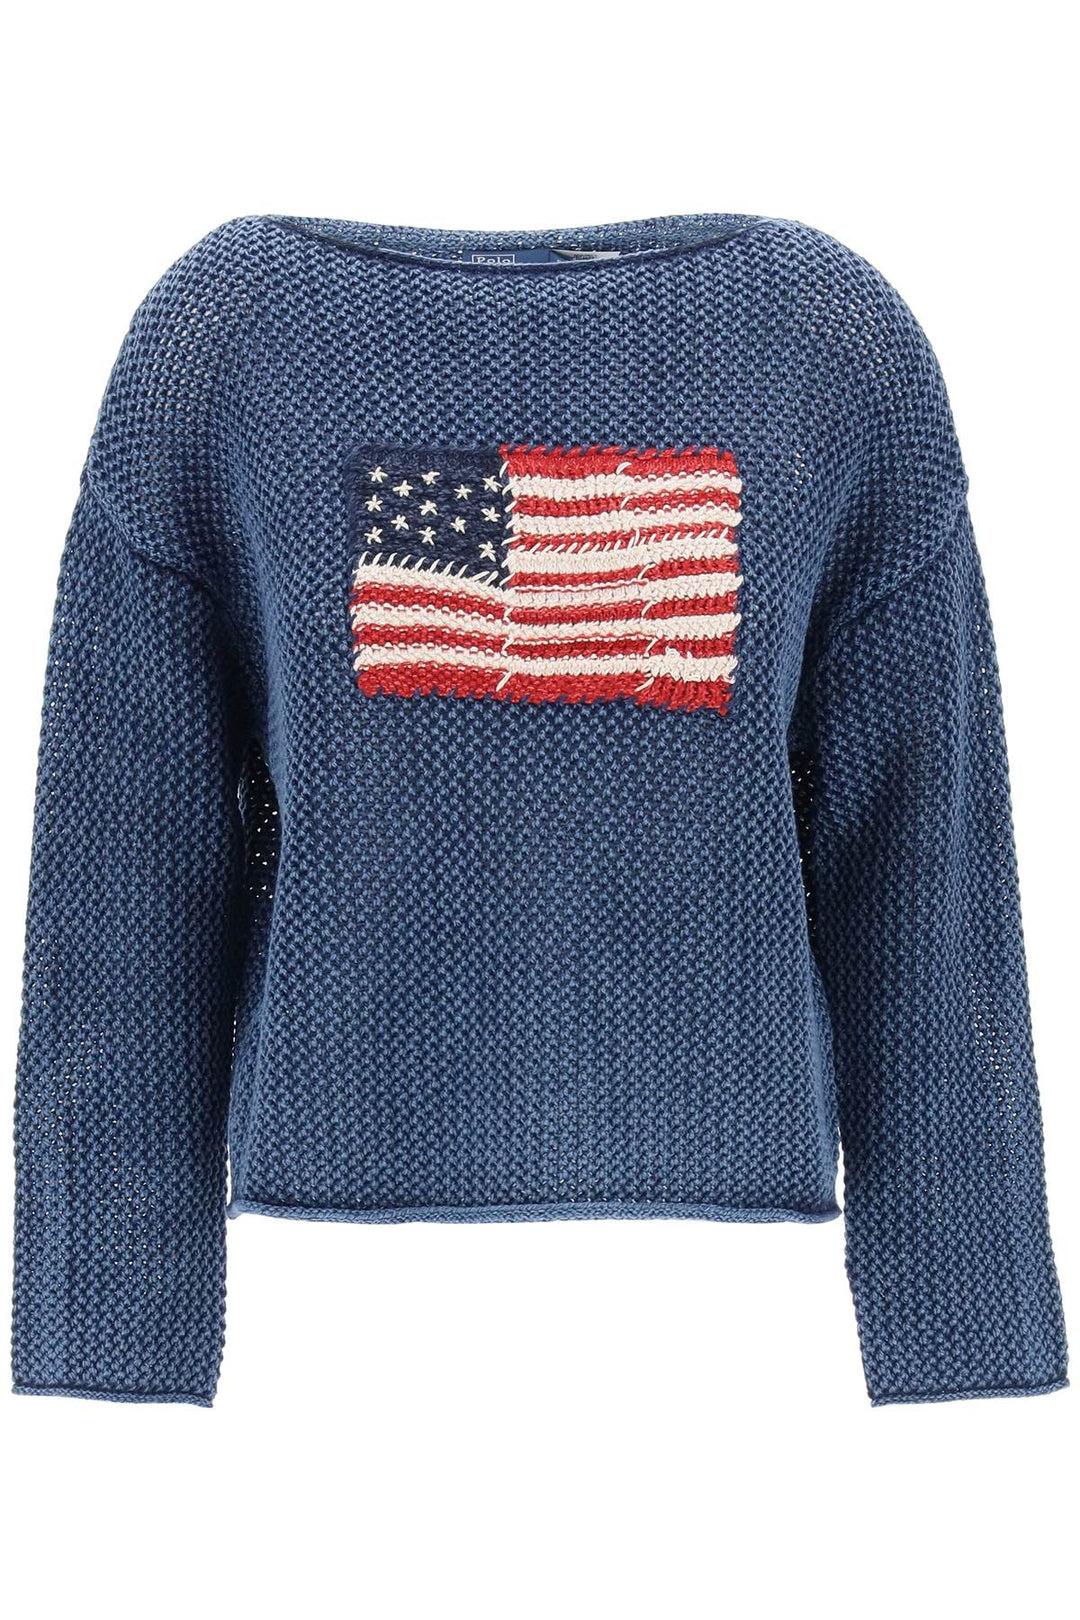 Polo Ralph Lauren Replace With Double Quotepointelle Knit Pullover With Embroidered Flag   Blu